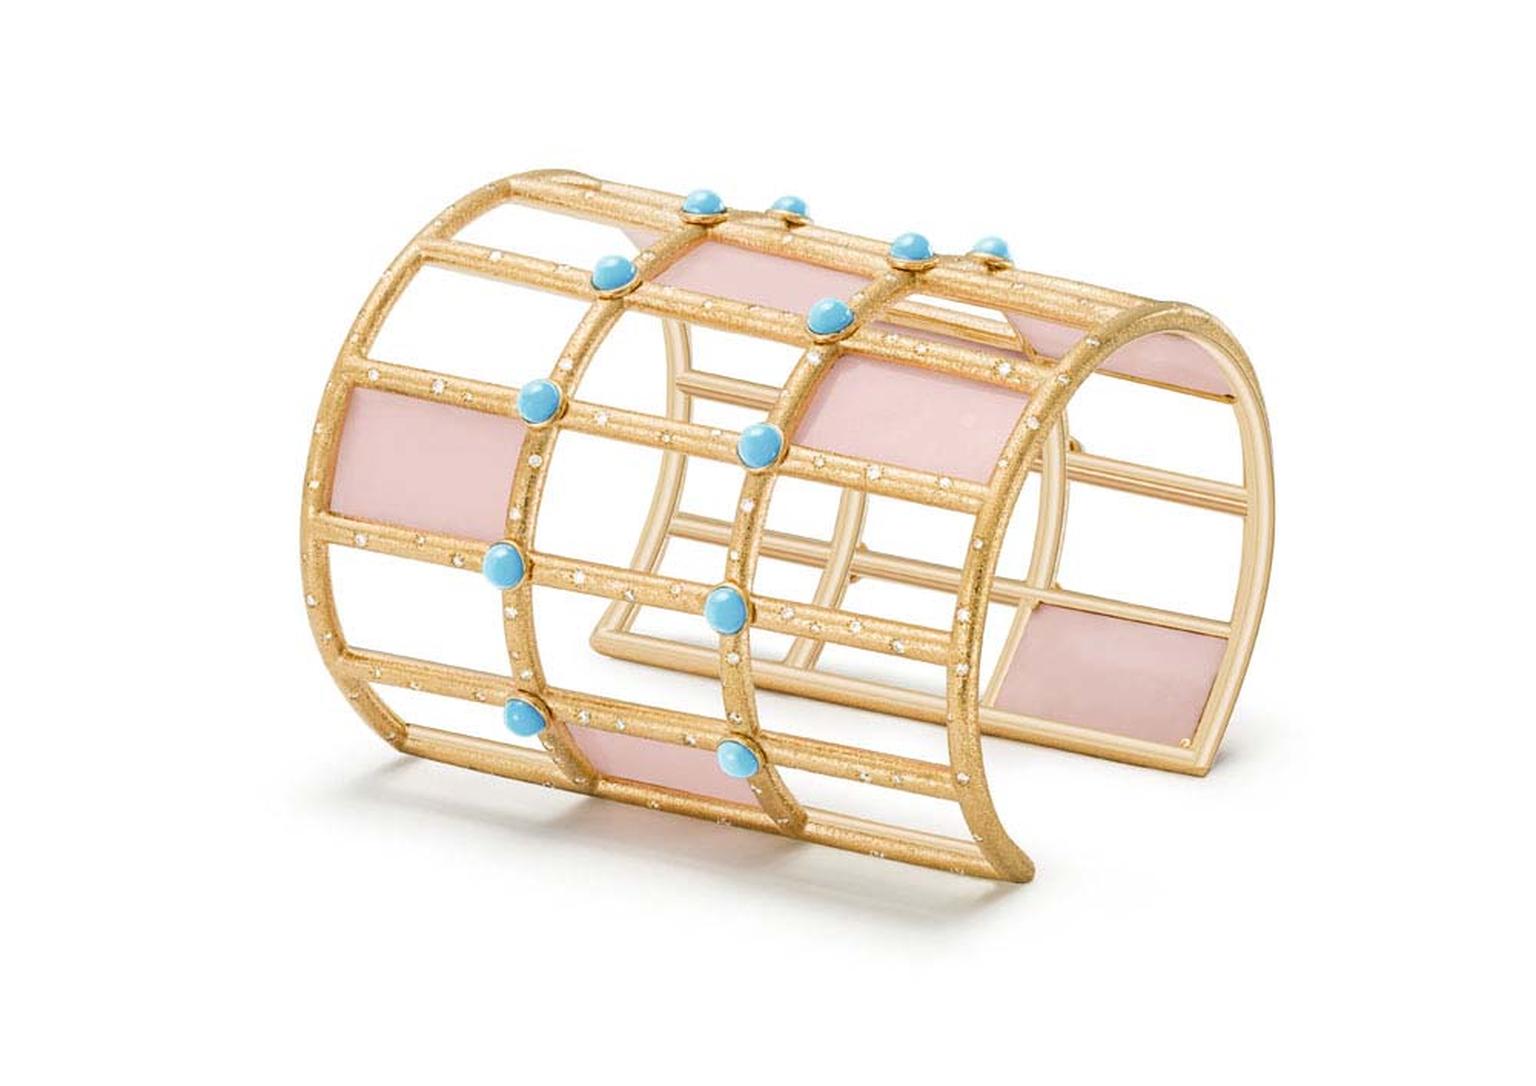 Extremely Piaget cuff bracelet in pink gold set with pink opal plates, turquoise beads and brilliant-cut diamonds.